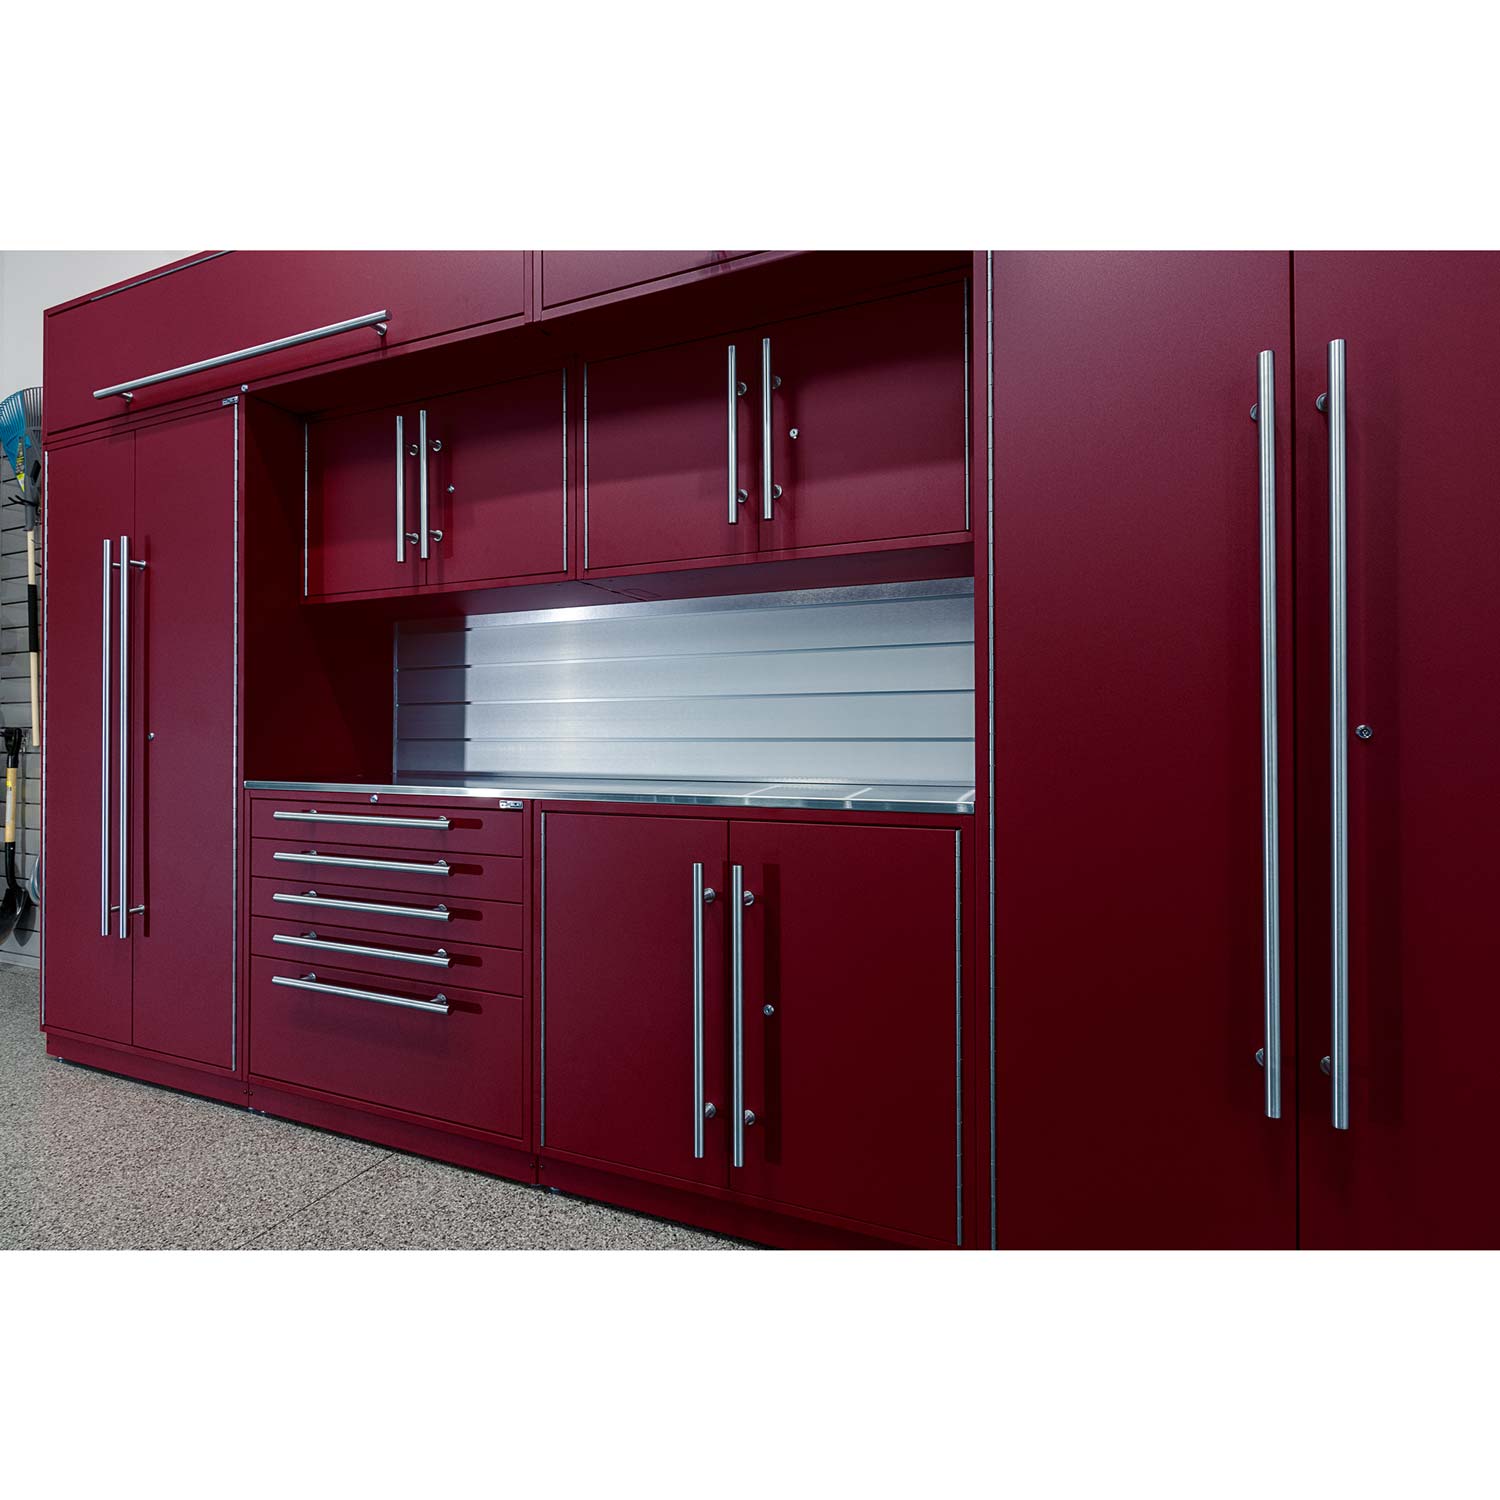 LUX Cabinets – 10 ft set – MAX